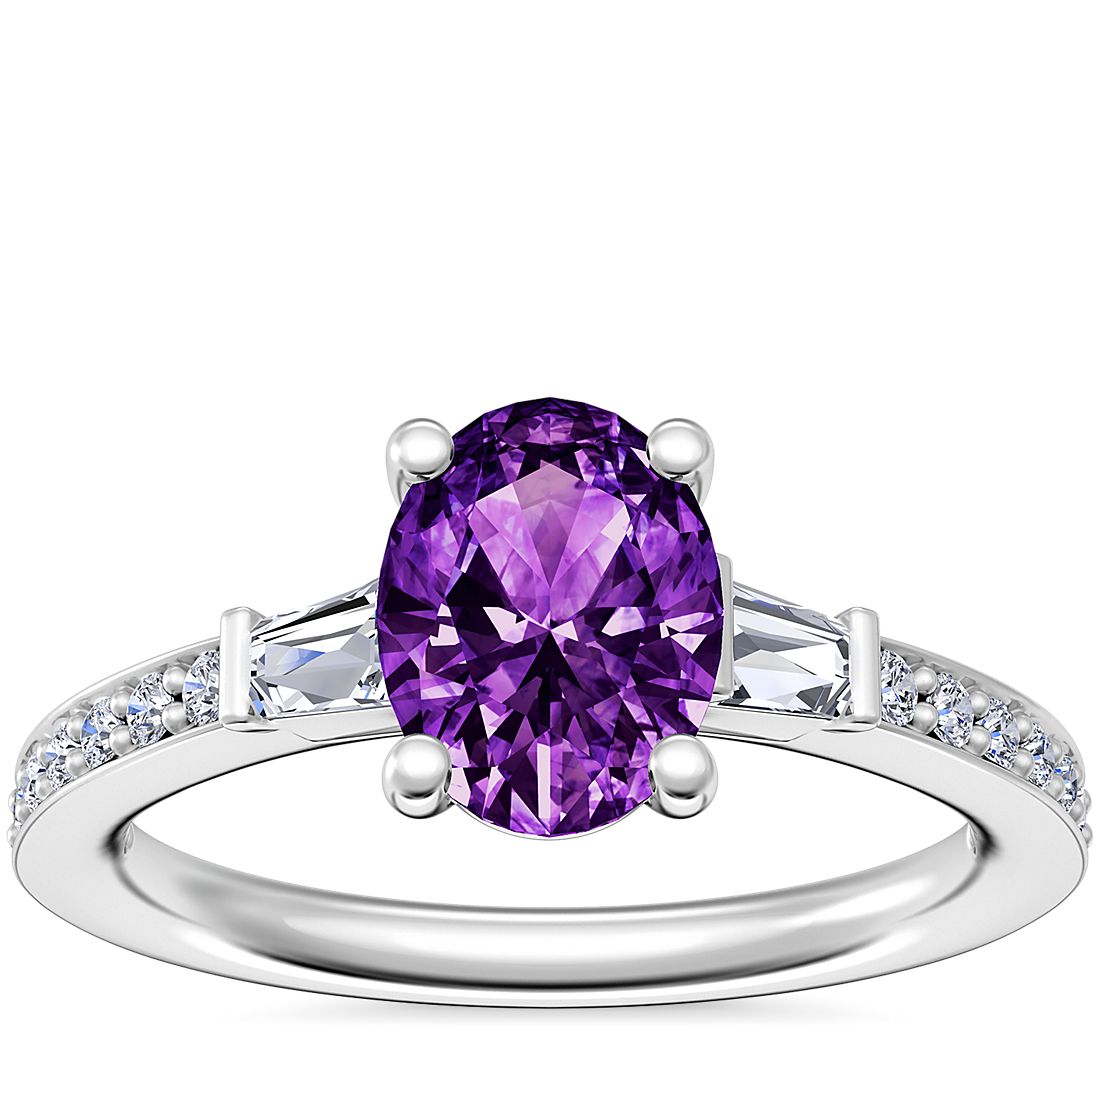 Tapered Baguette Diamond Cathedral Engagement Ring with Oval Amethyst in 14k White Gold (8x6mm)